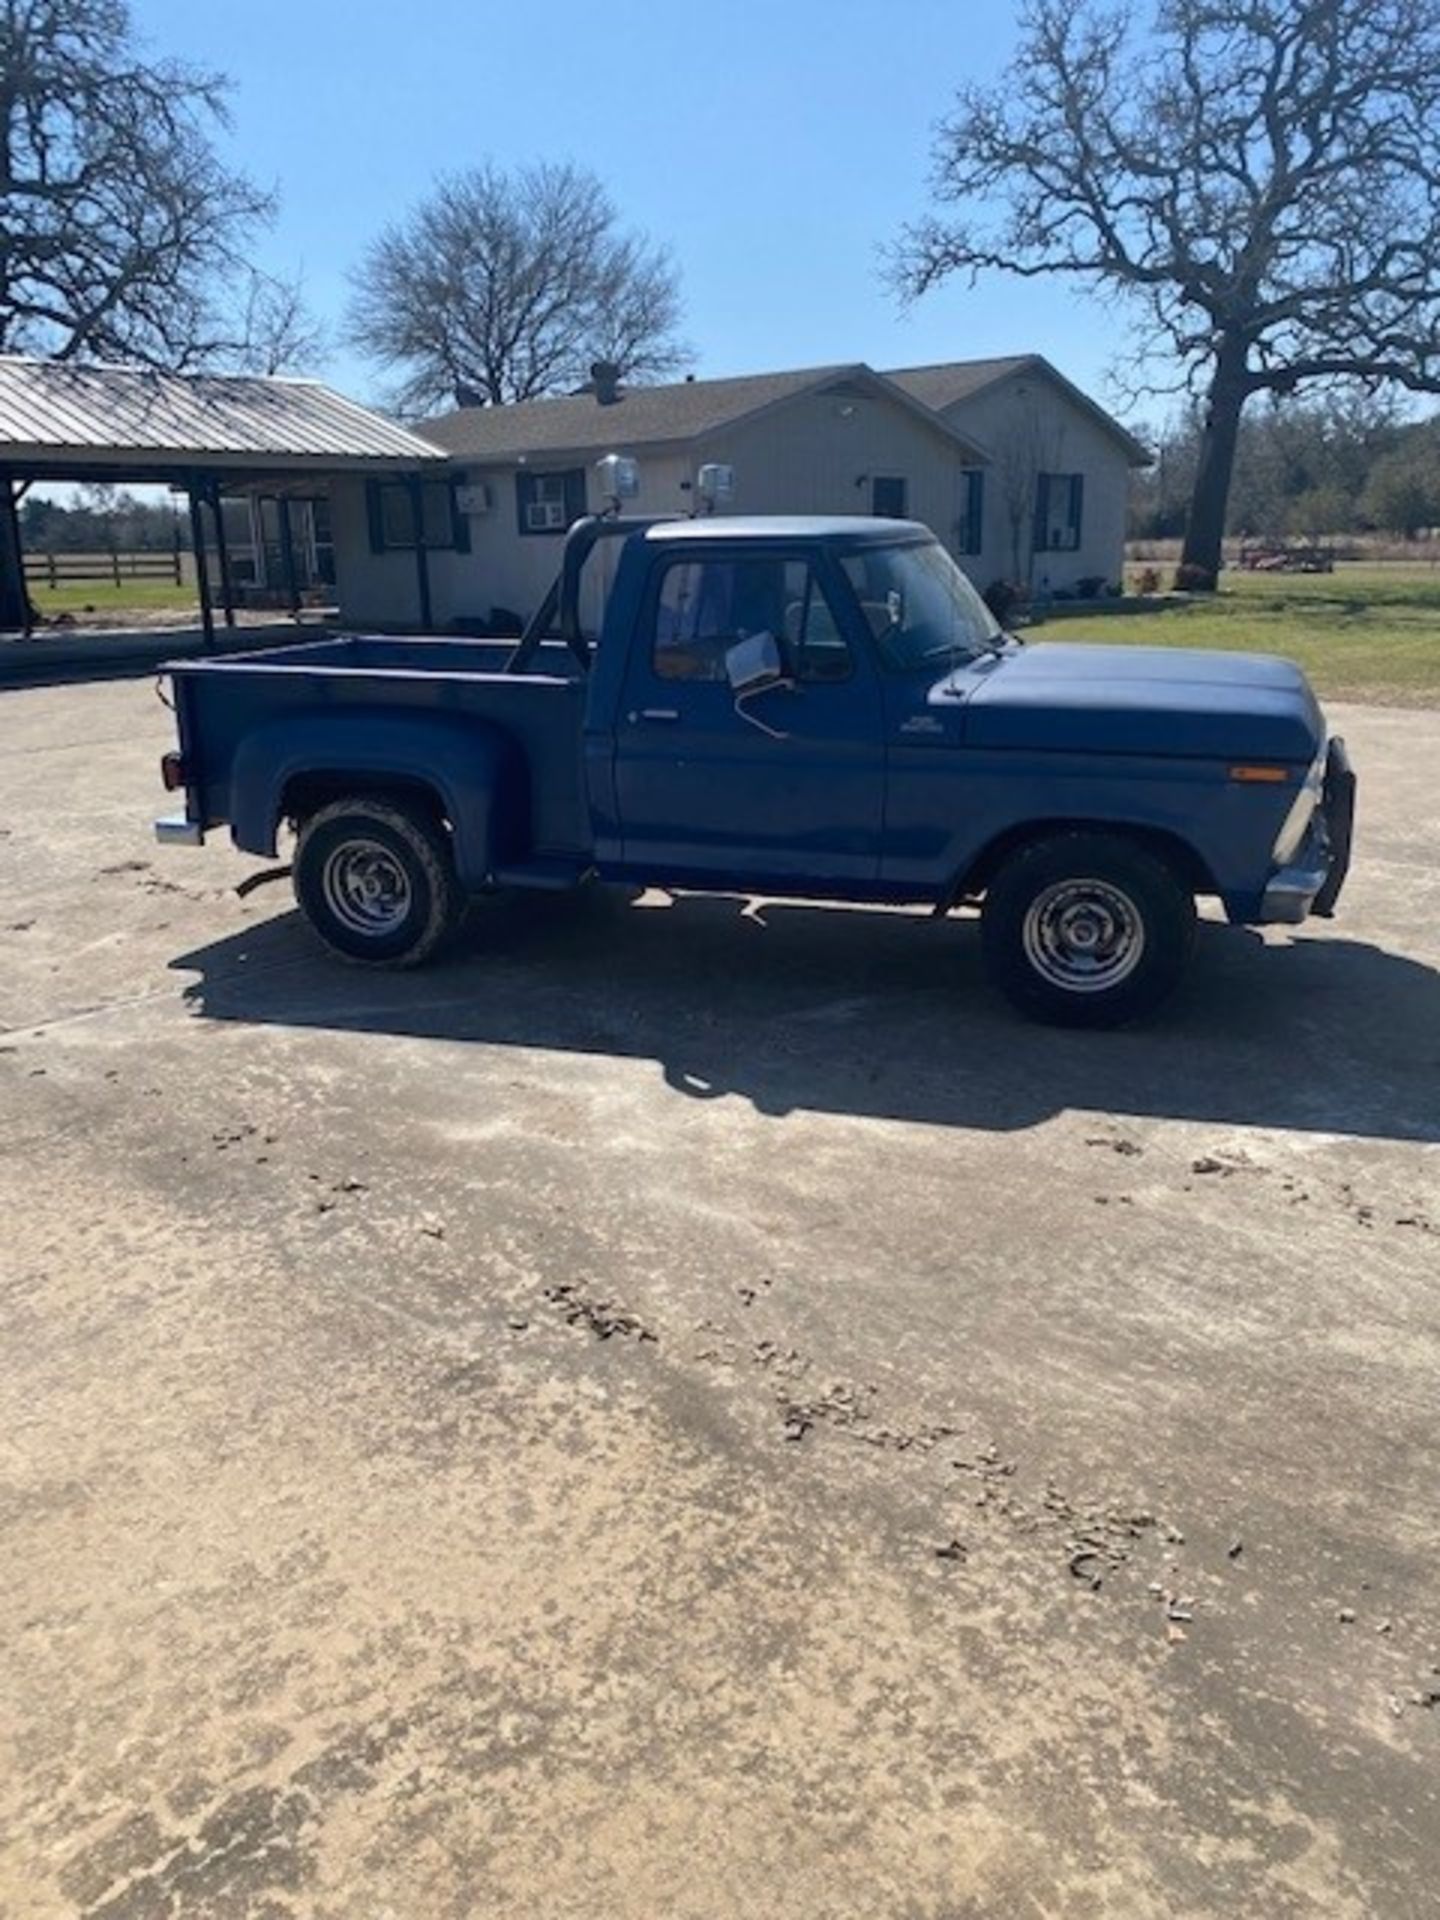 1977 Ford F150 Pickup - Image 10 of 20